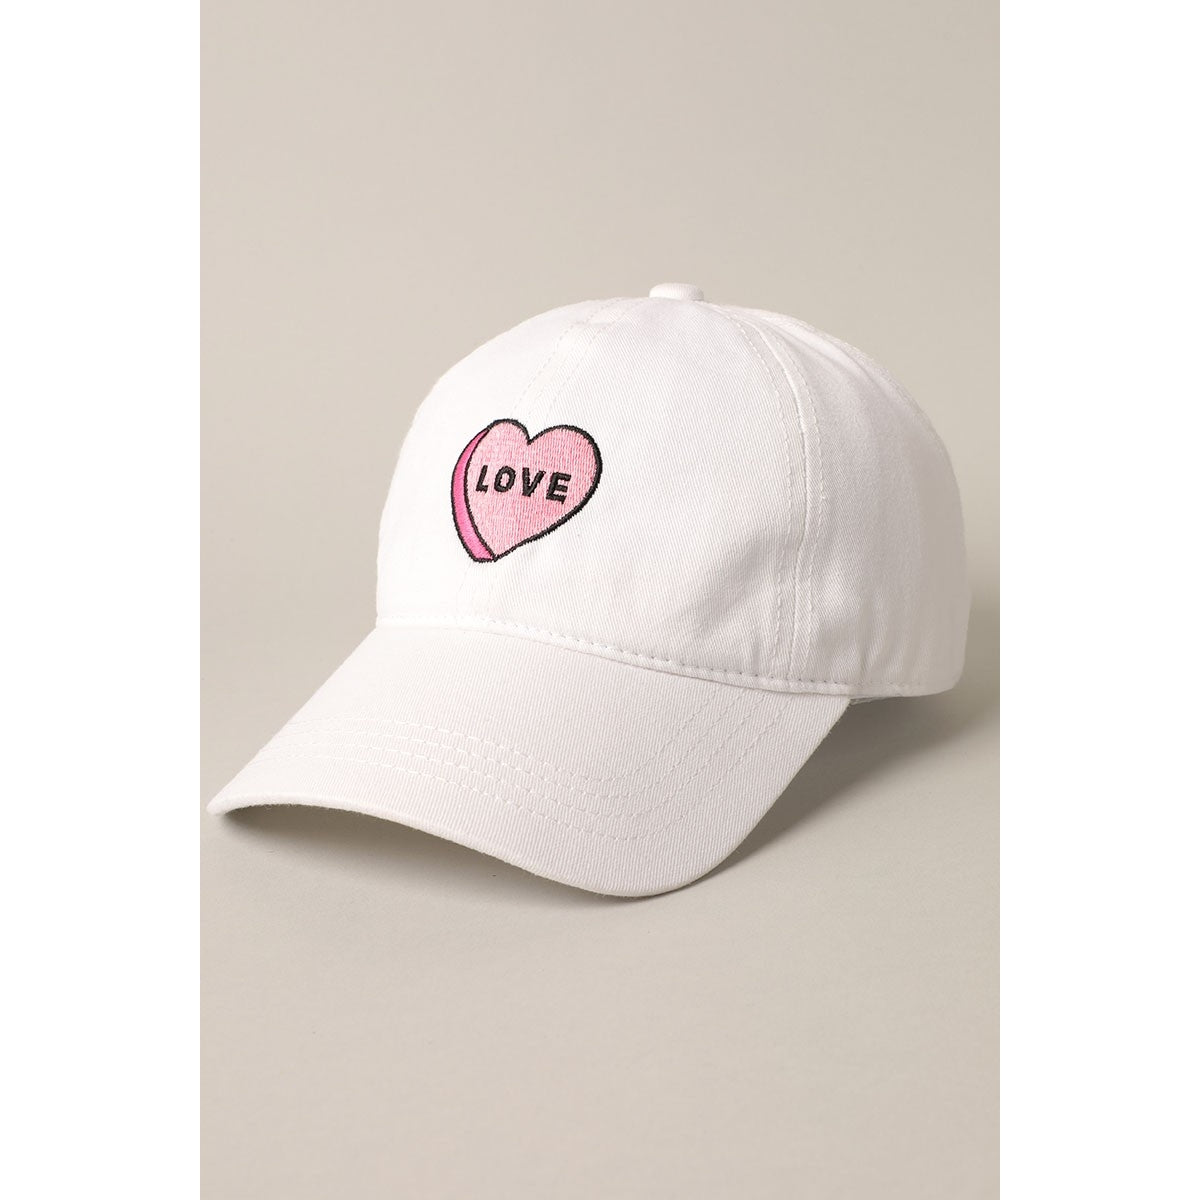 FLASH SALE - The Valerie - Love Embroidered Baseball Hat